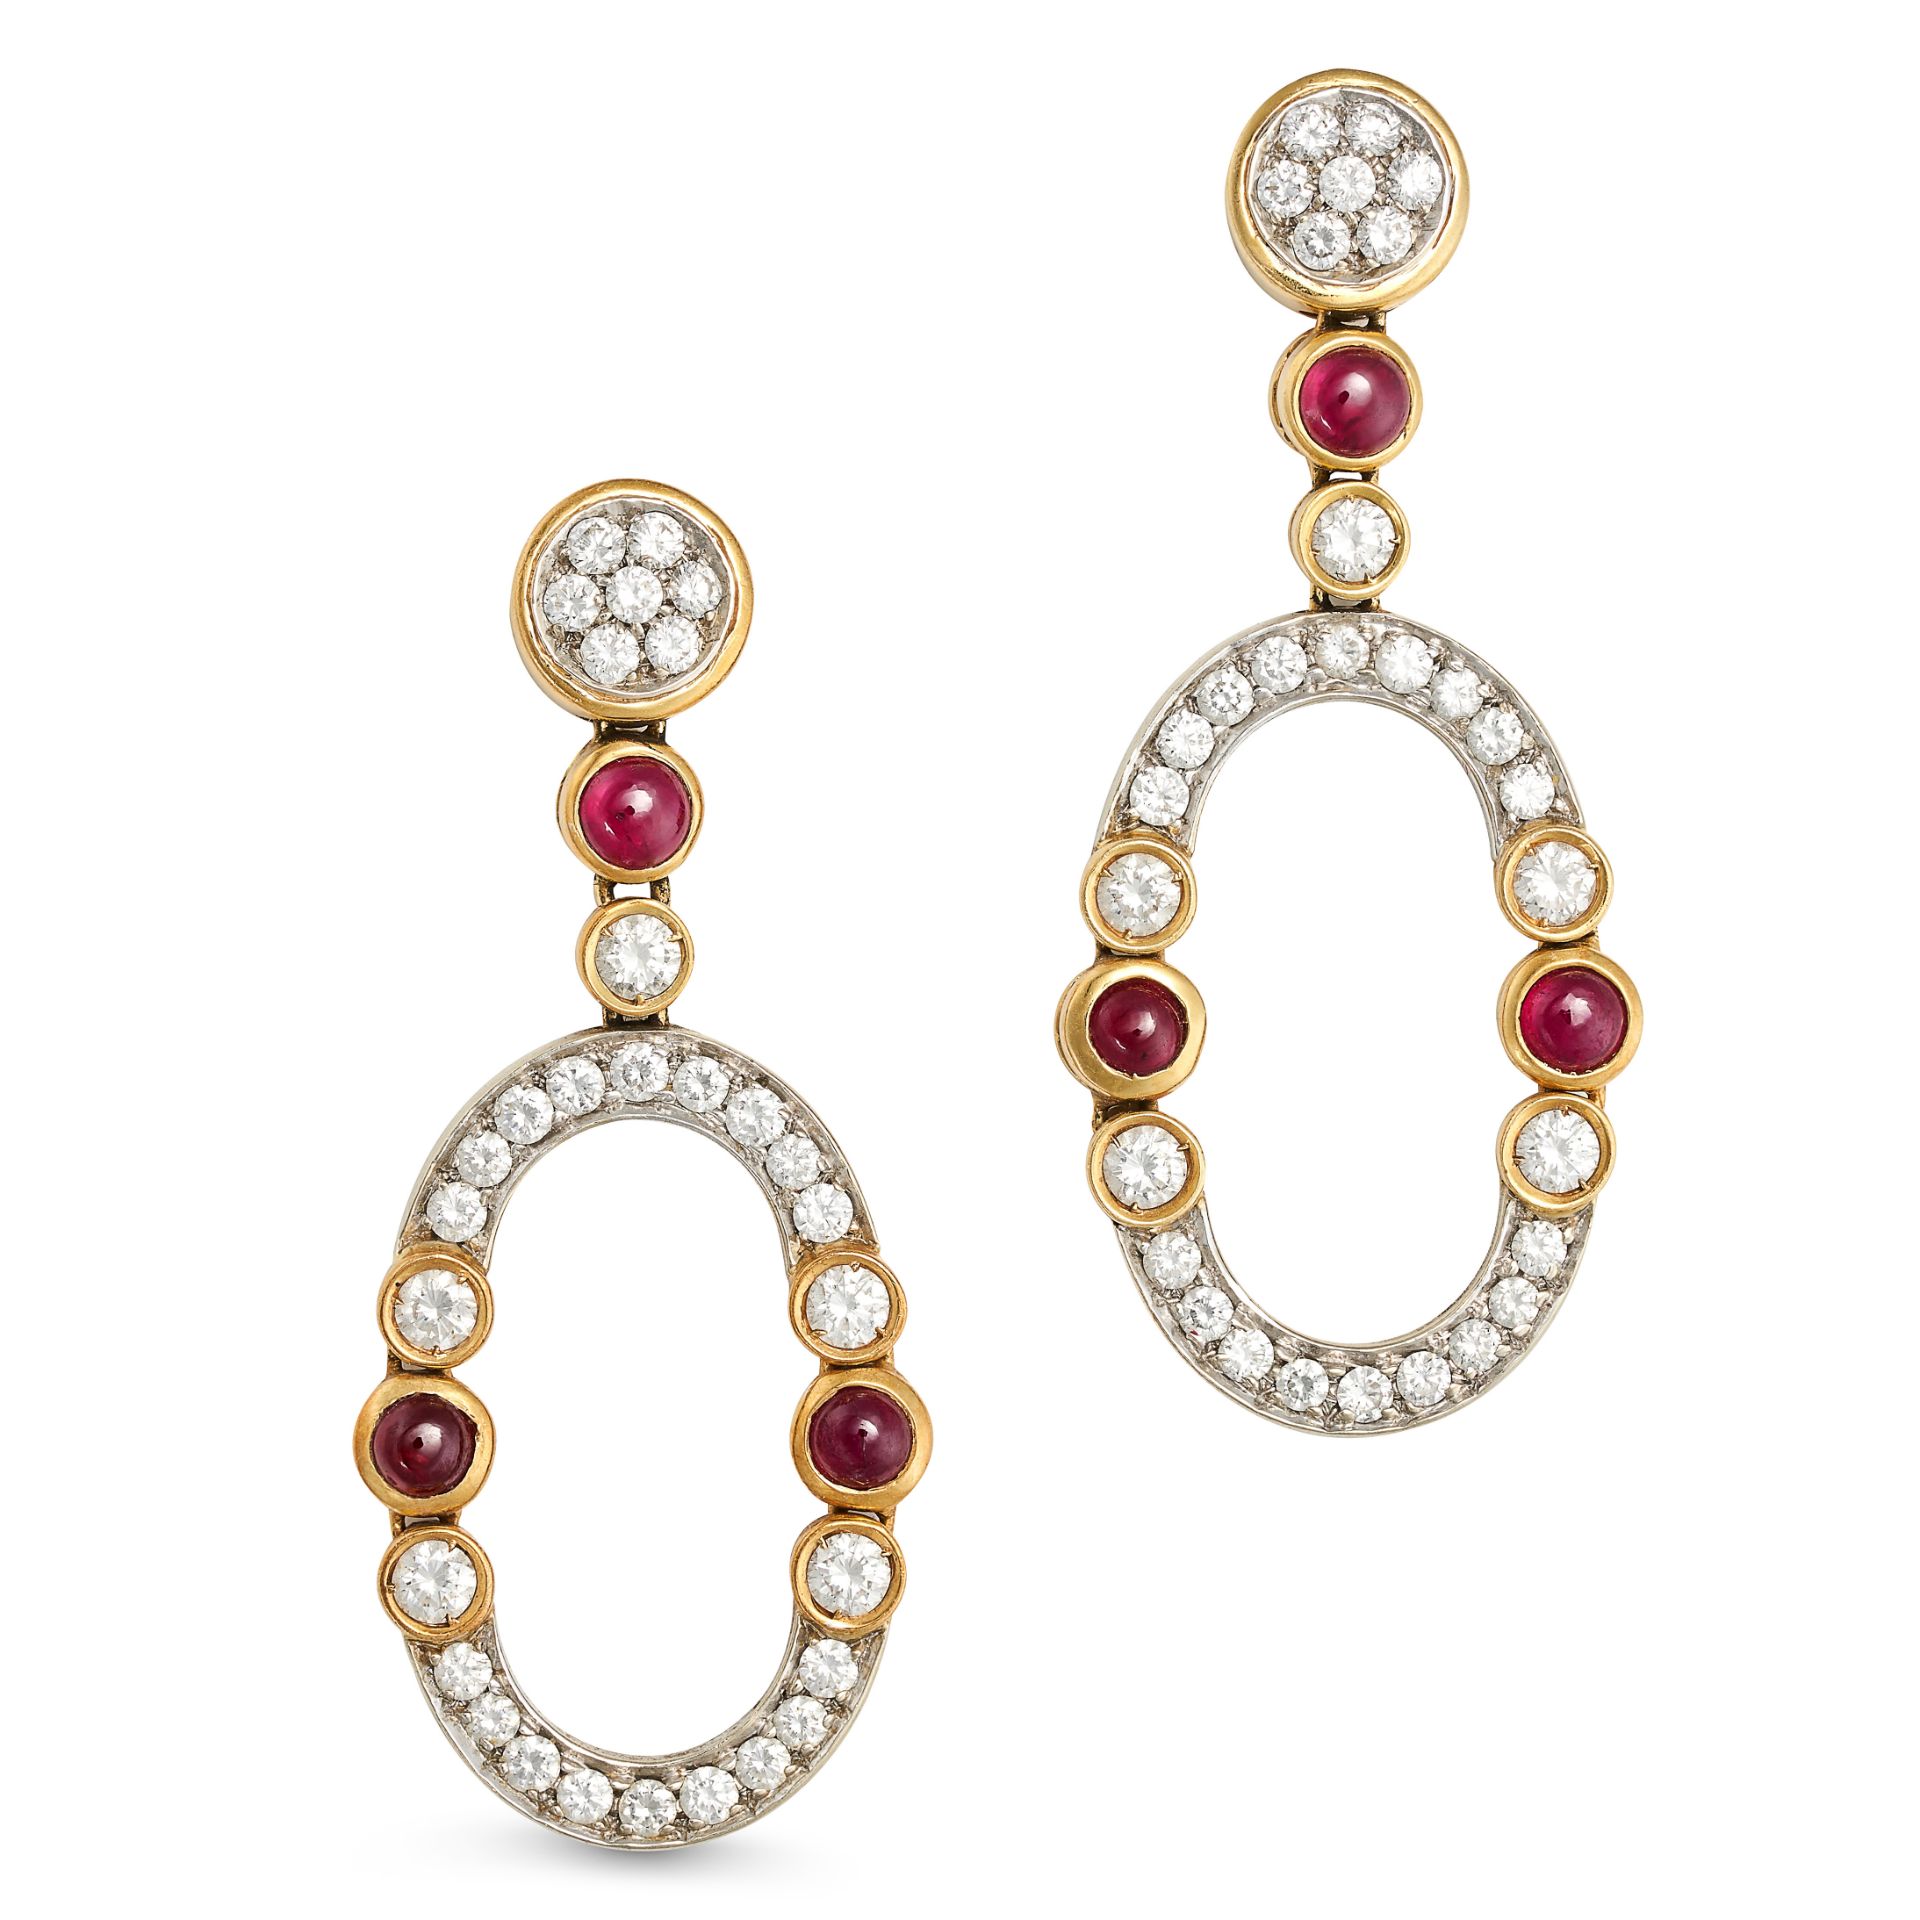 A PAIR OF VINTAGE RUBY AND DIAMOND DROP EARRINGS in 18ct white and yellow gold, set with round br...